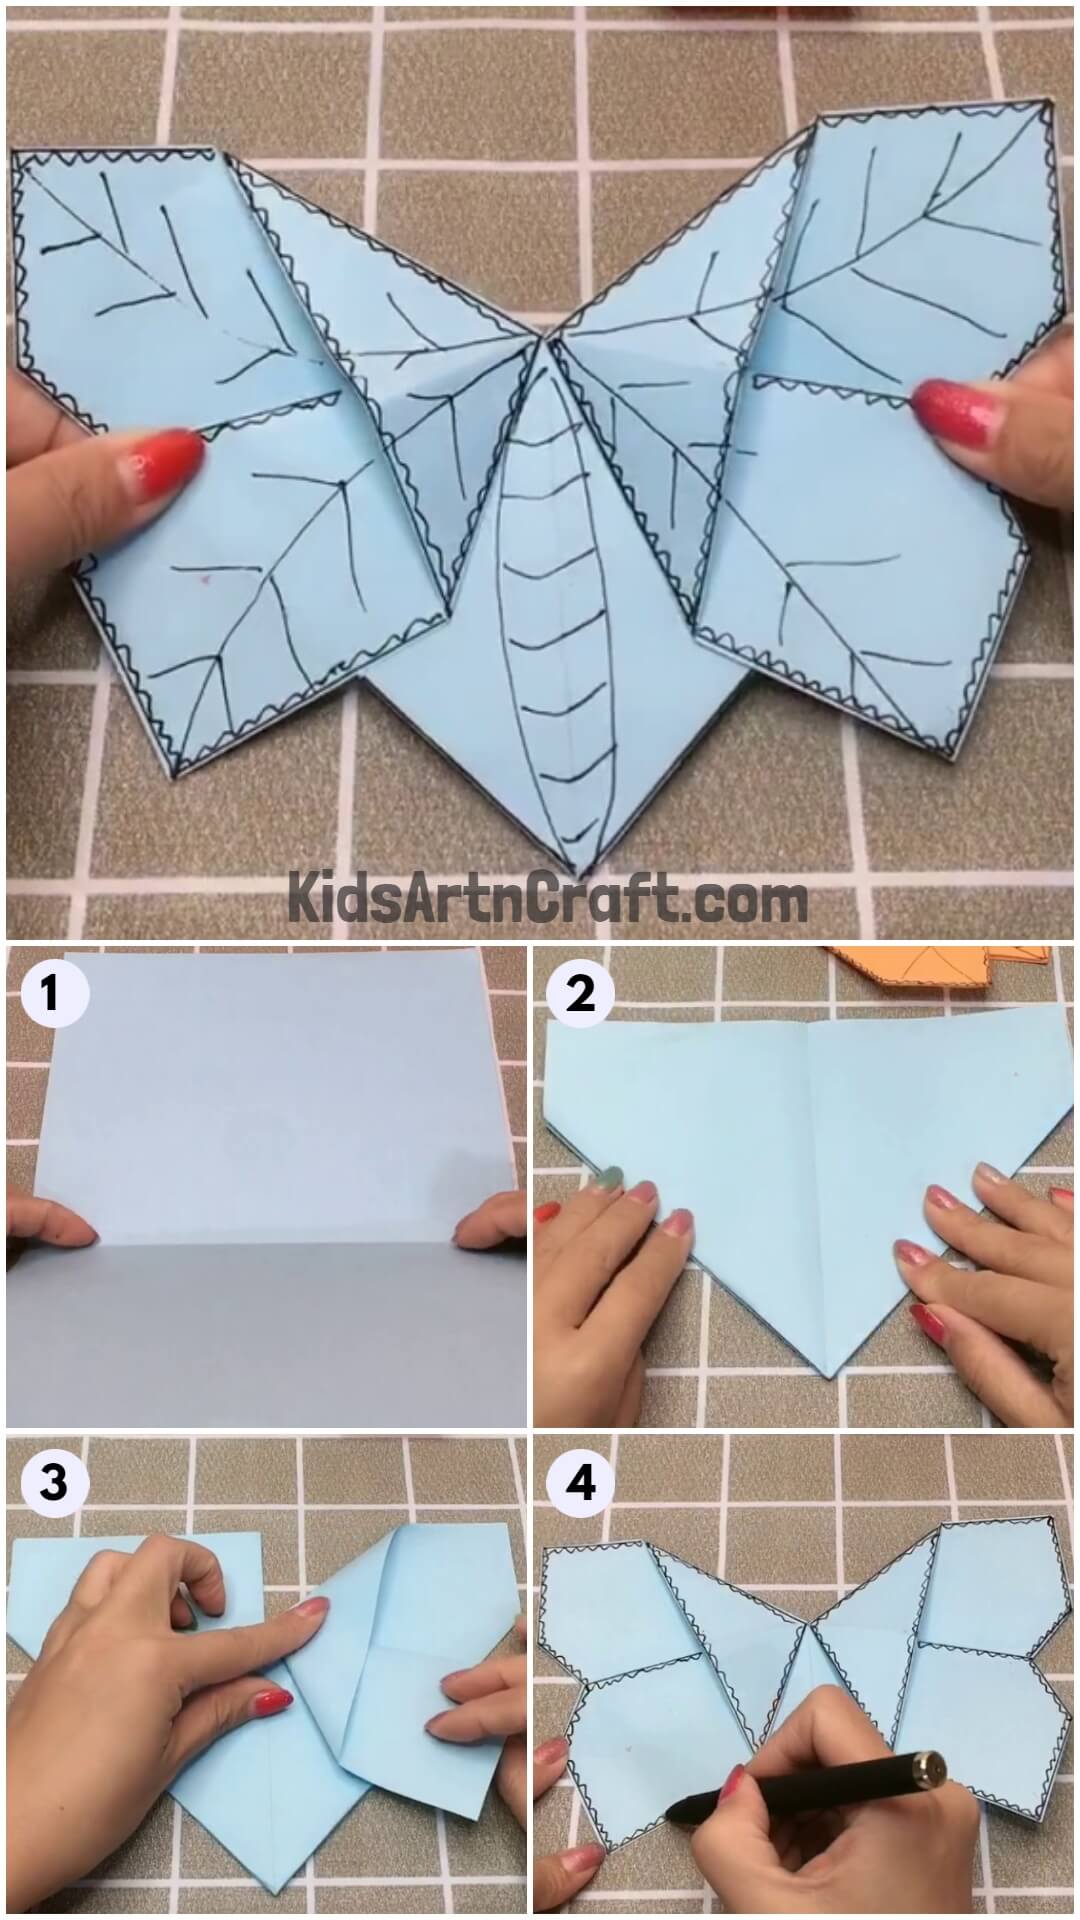 DIY Origami Paper Butterfly Craft - Step by Step Image Tutorial